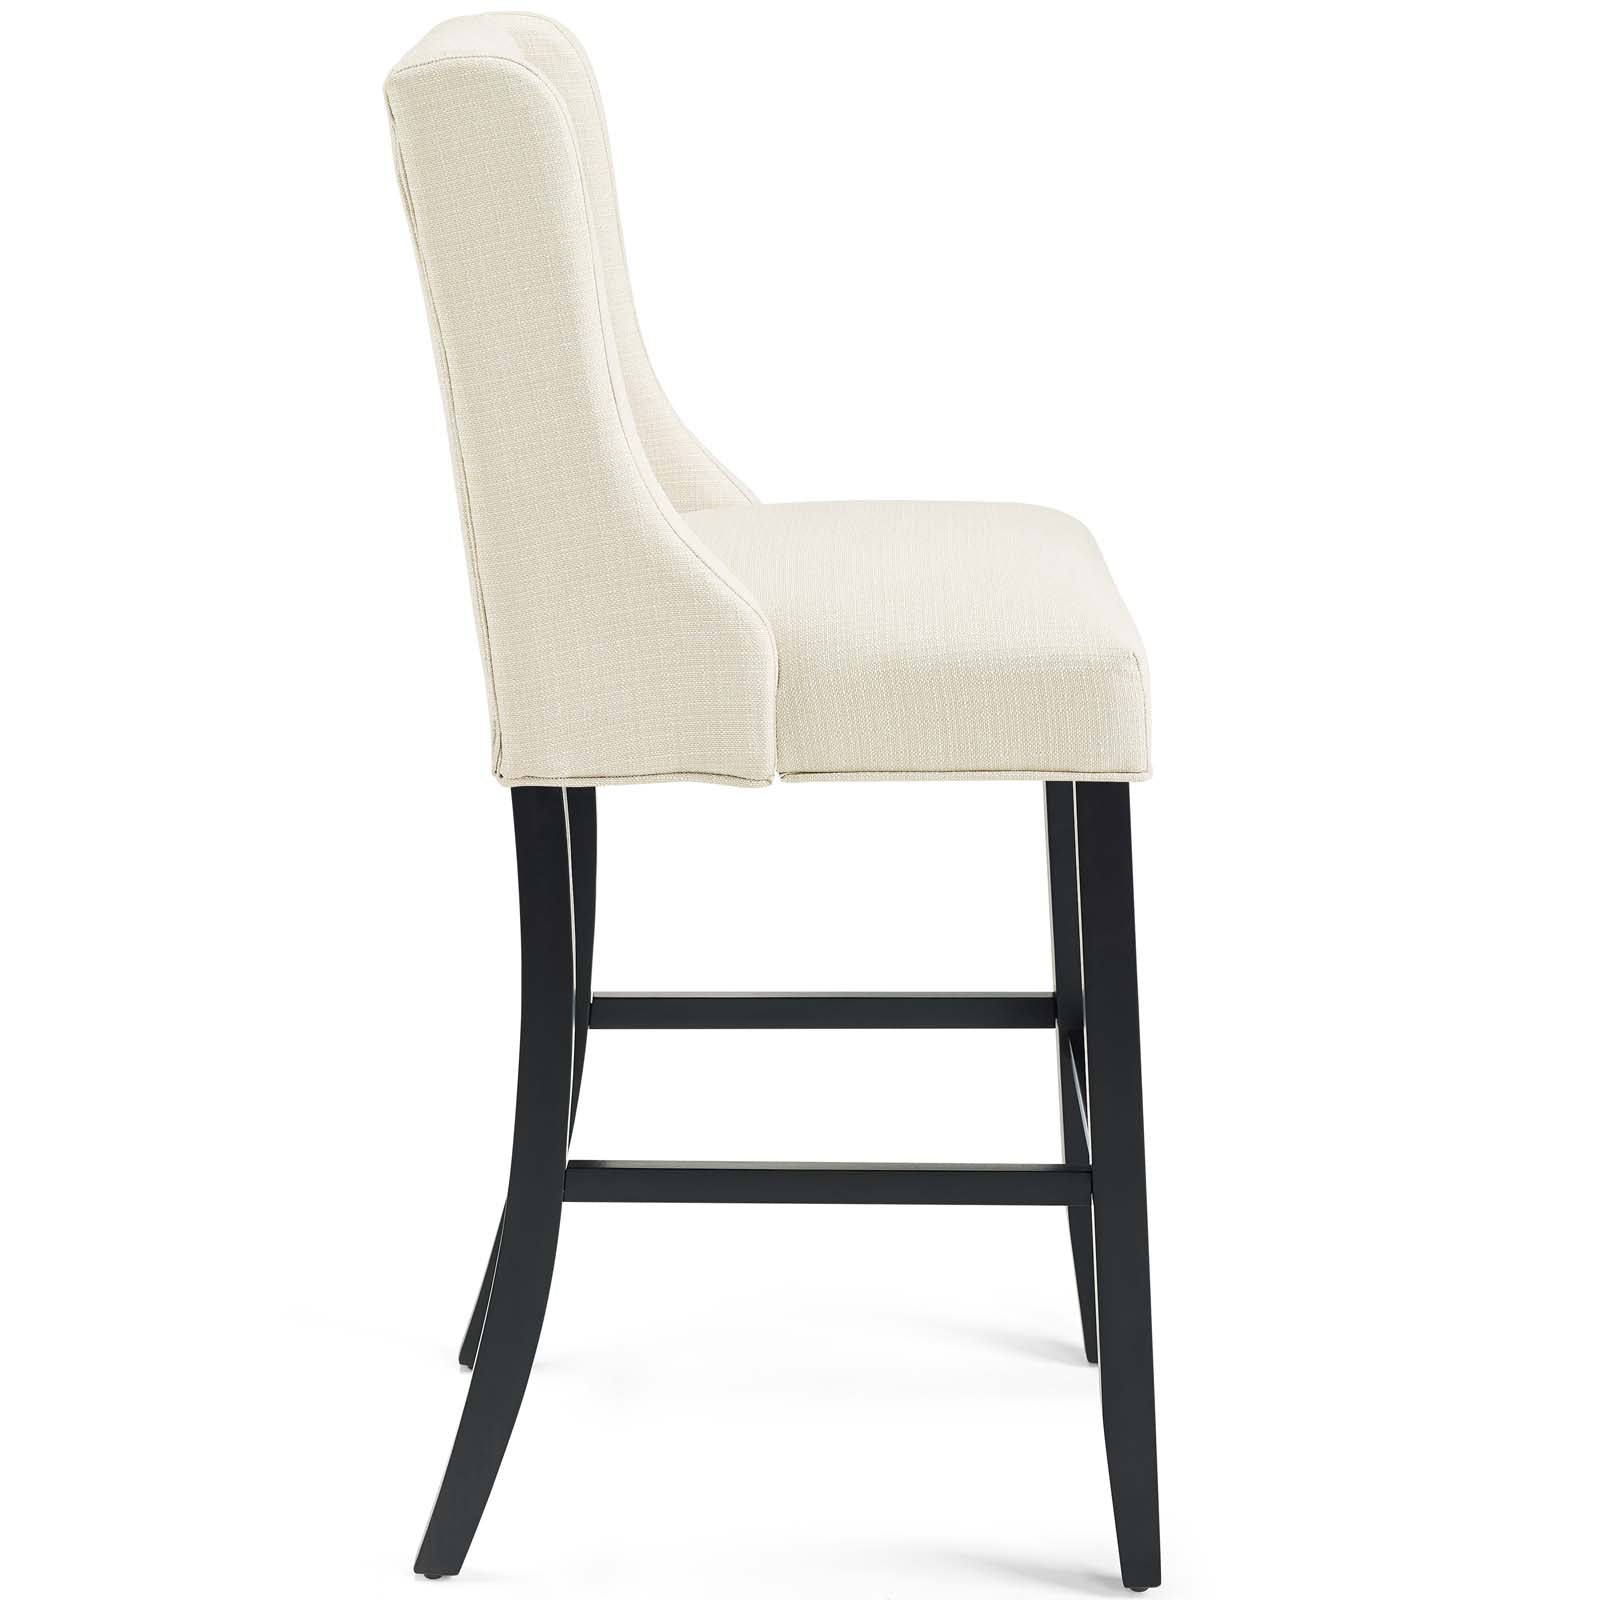 Modway Barstools - Baronet Tufted Button Upholstered Fabric Bar Stool Beige